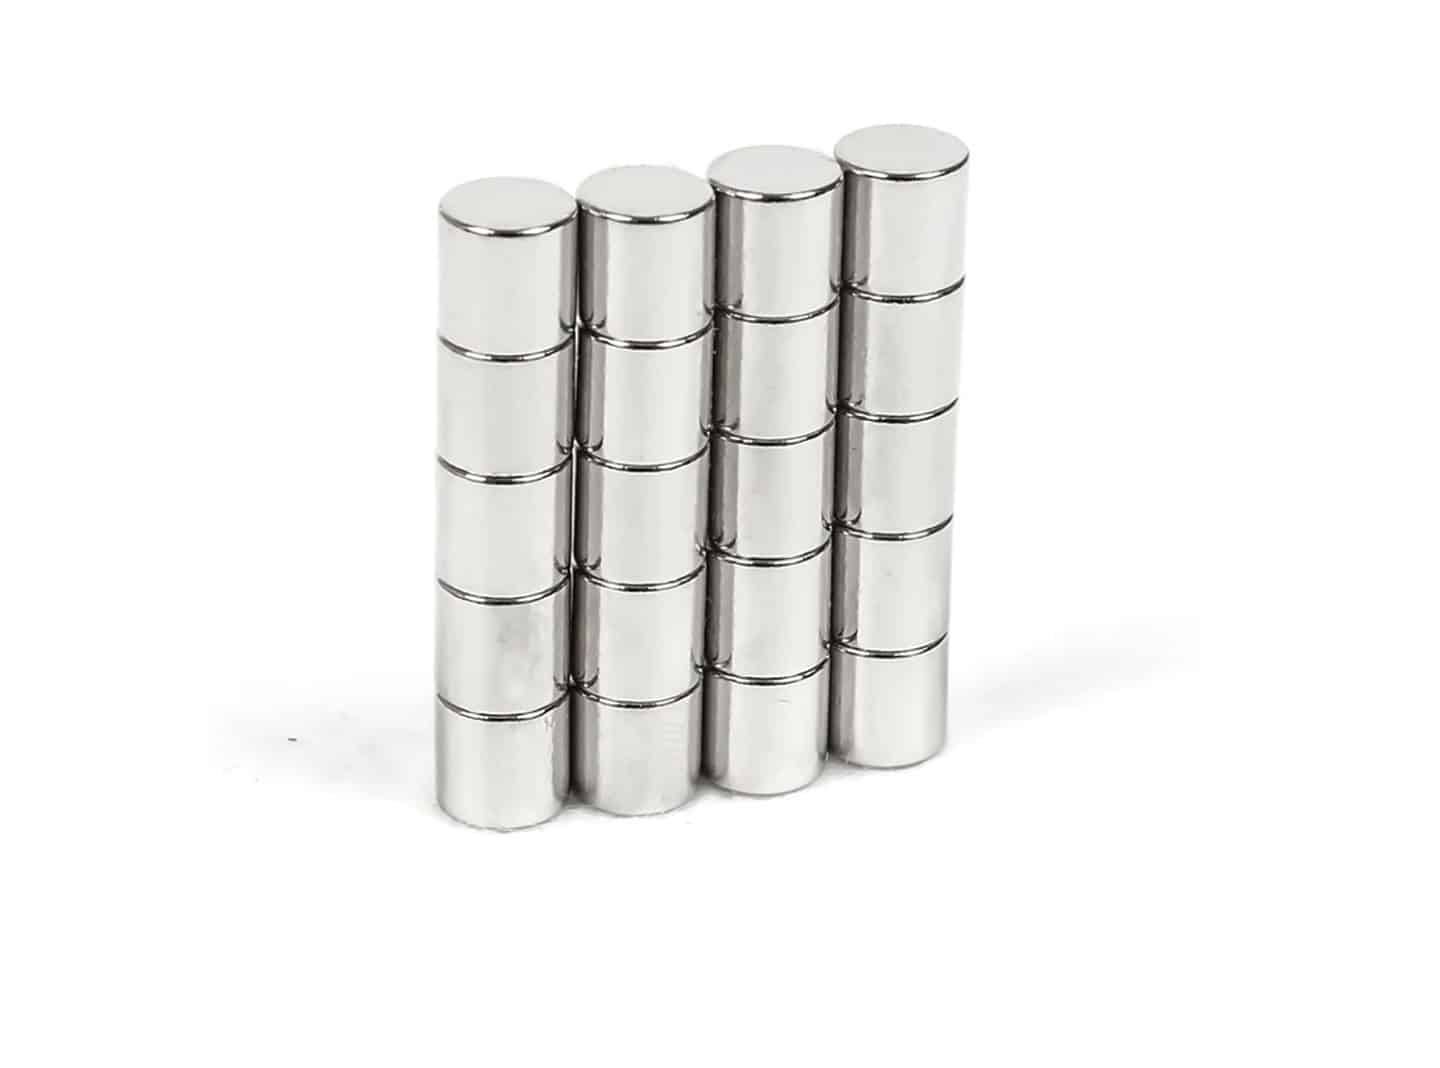 12 (6 pairs) Strong Magnets for Clasps